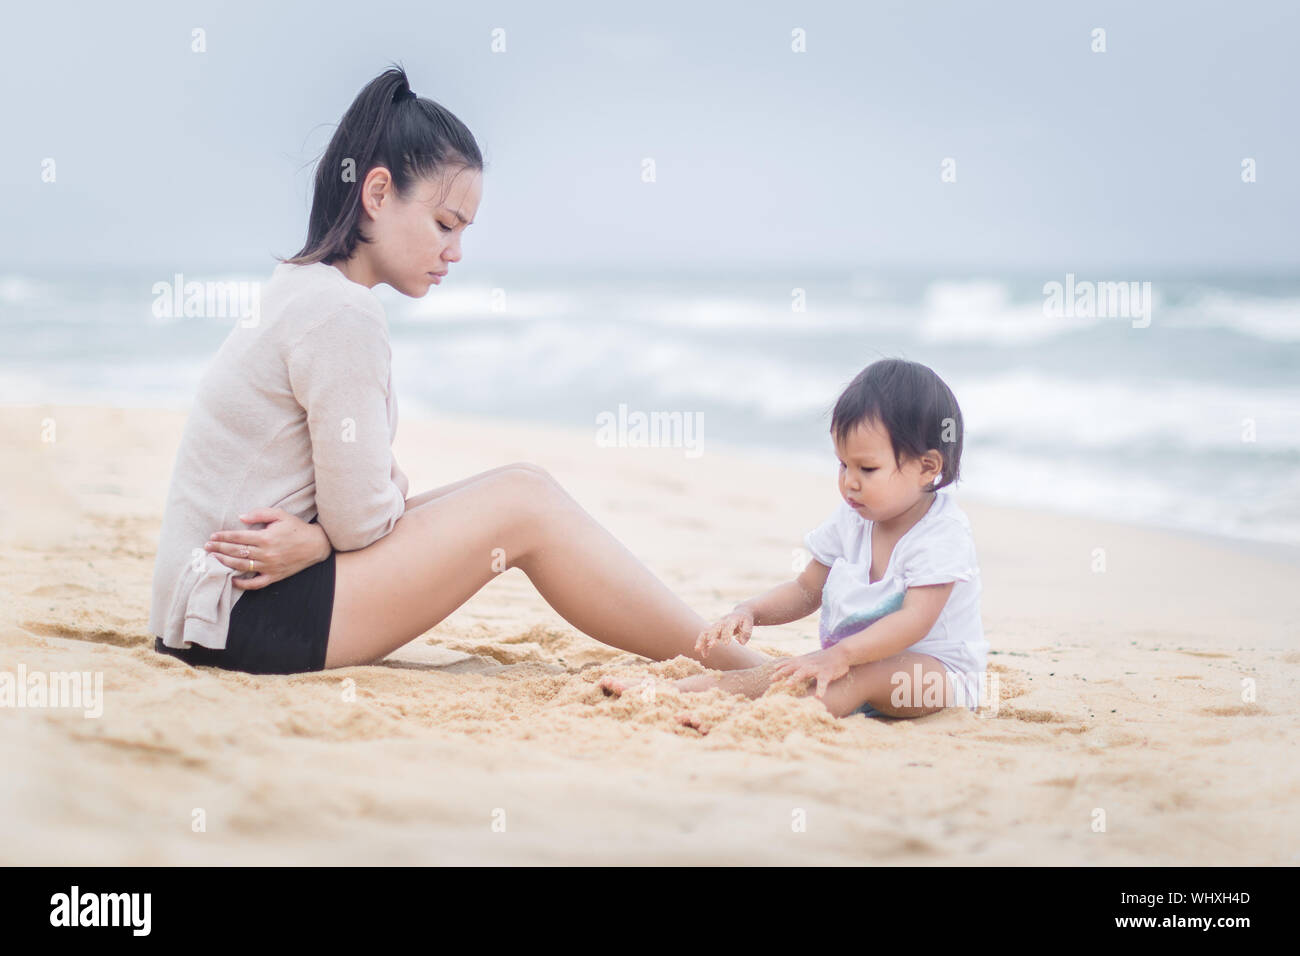 Stressed  and exhausted mother suffering from postpartum depression Stock Photo